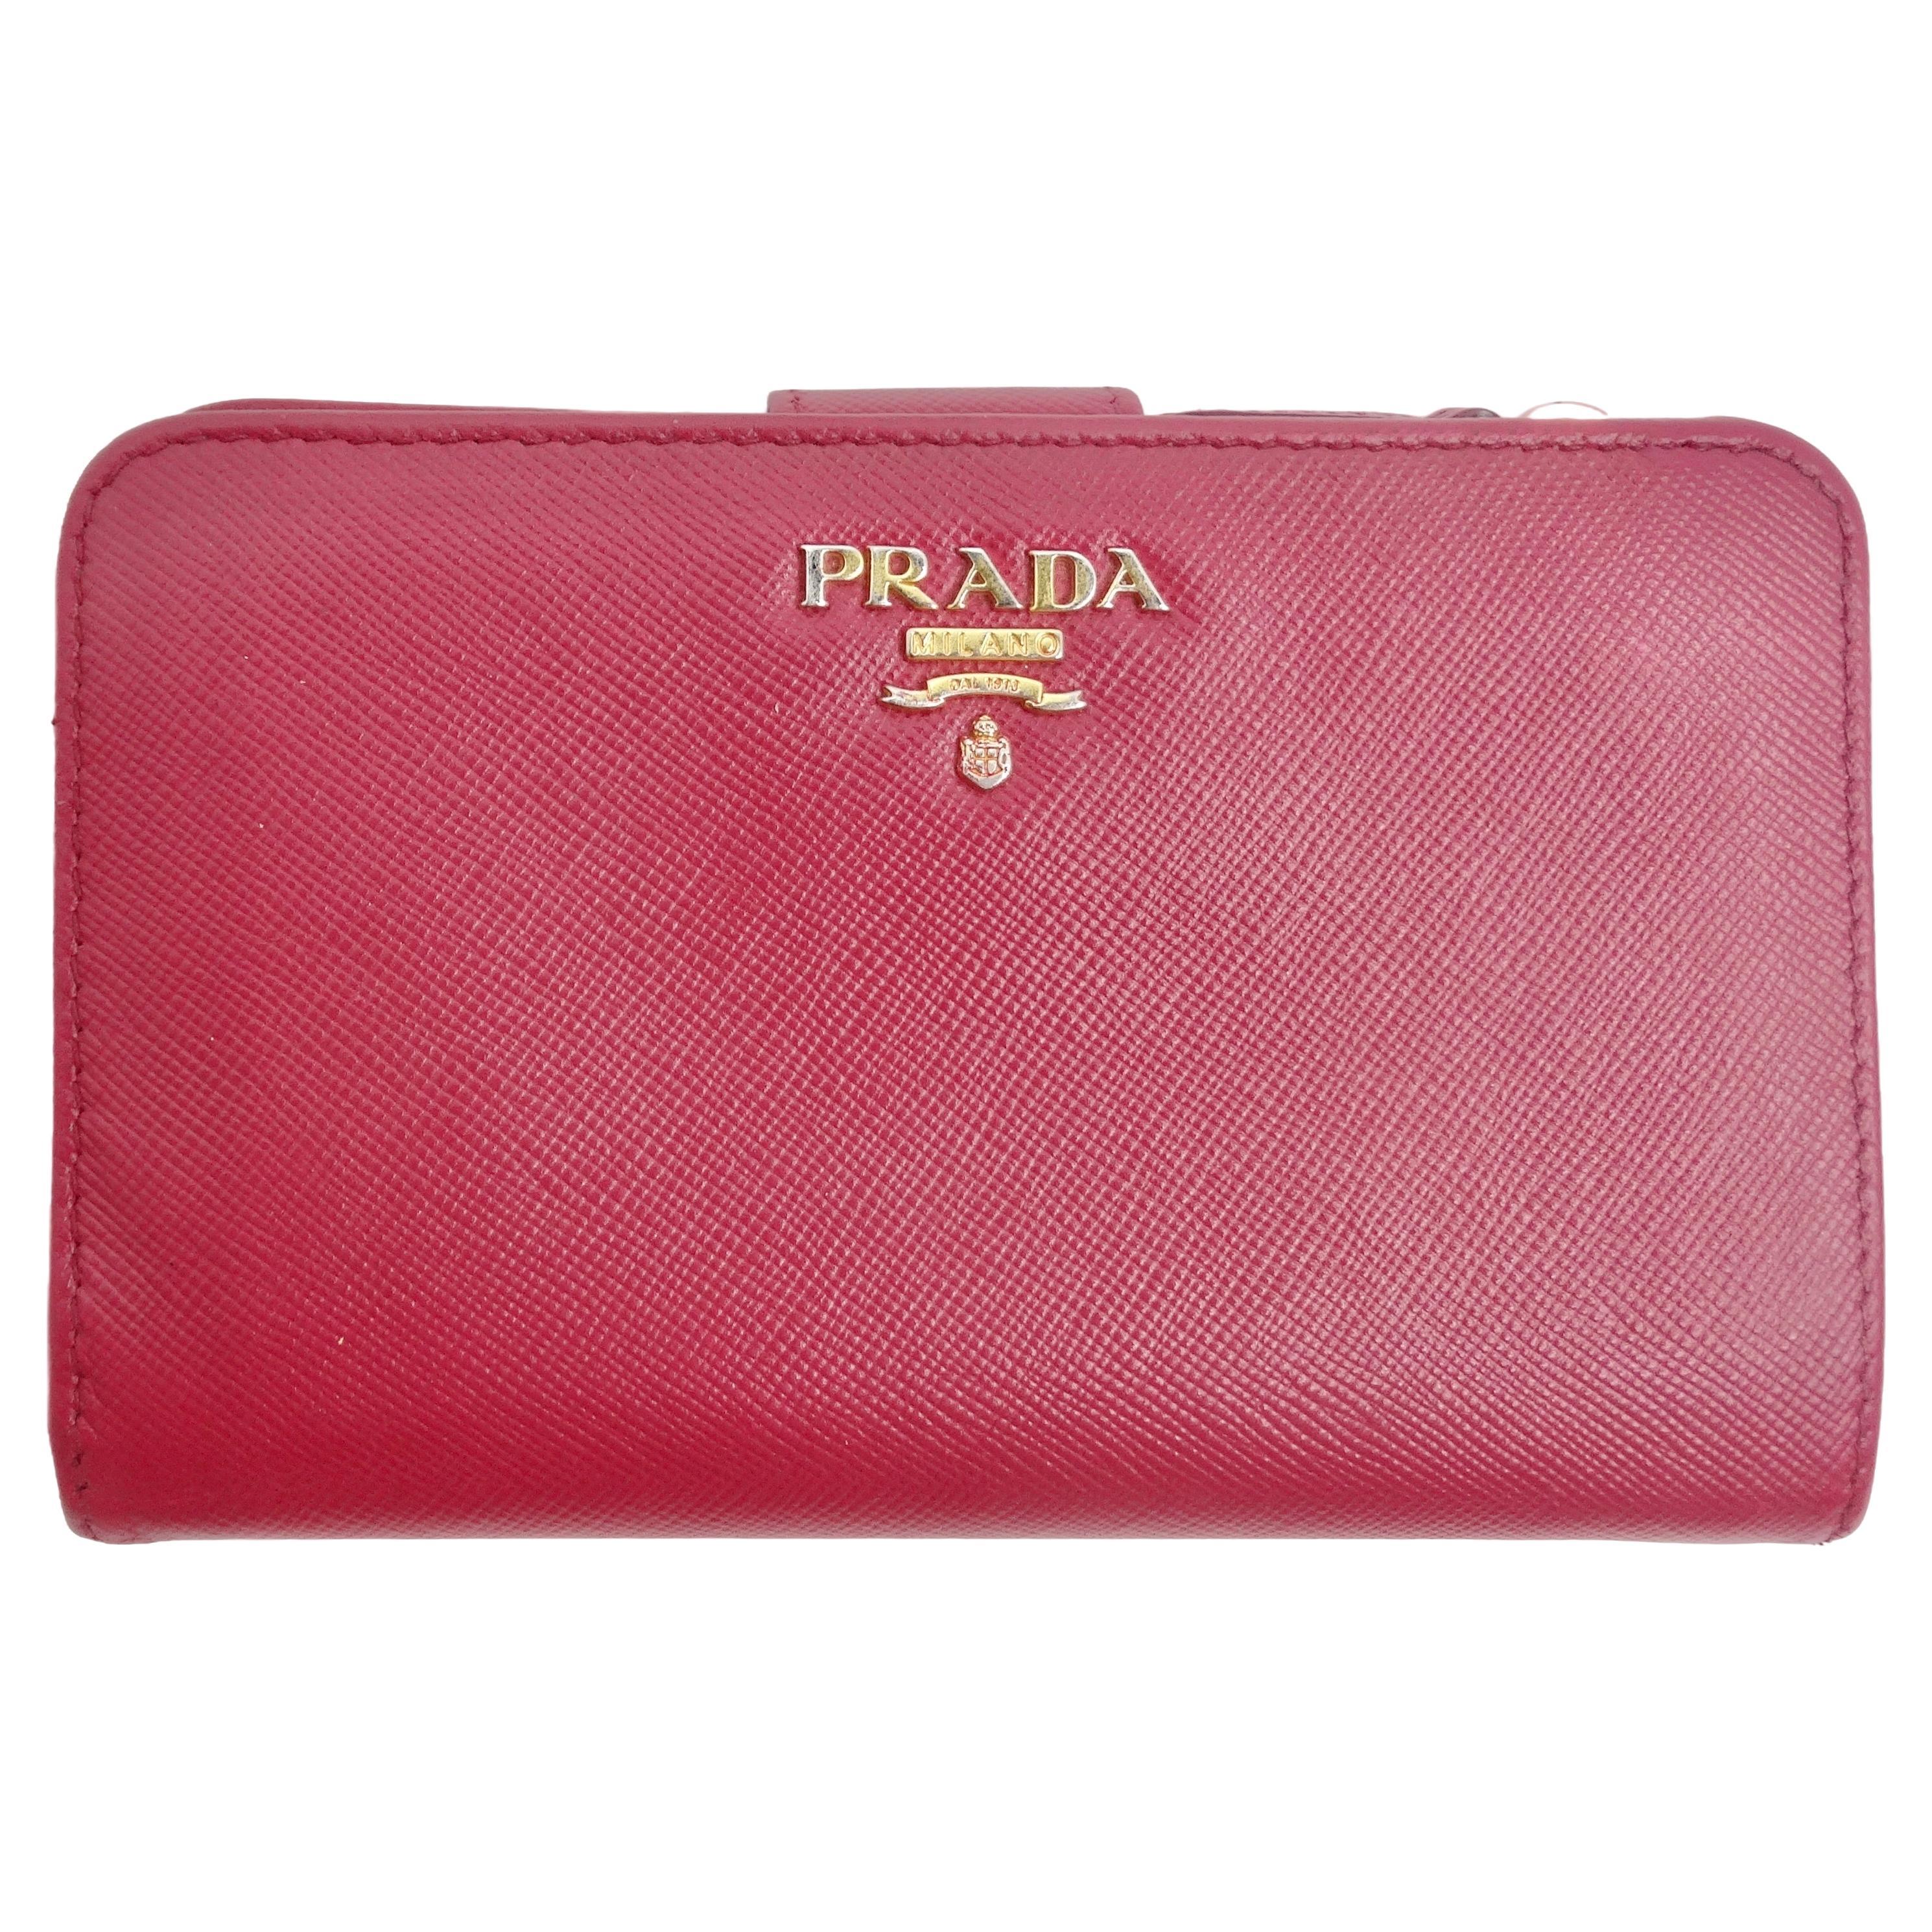 Prada Saffiano Leather Compact Wallet Pink For Sale